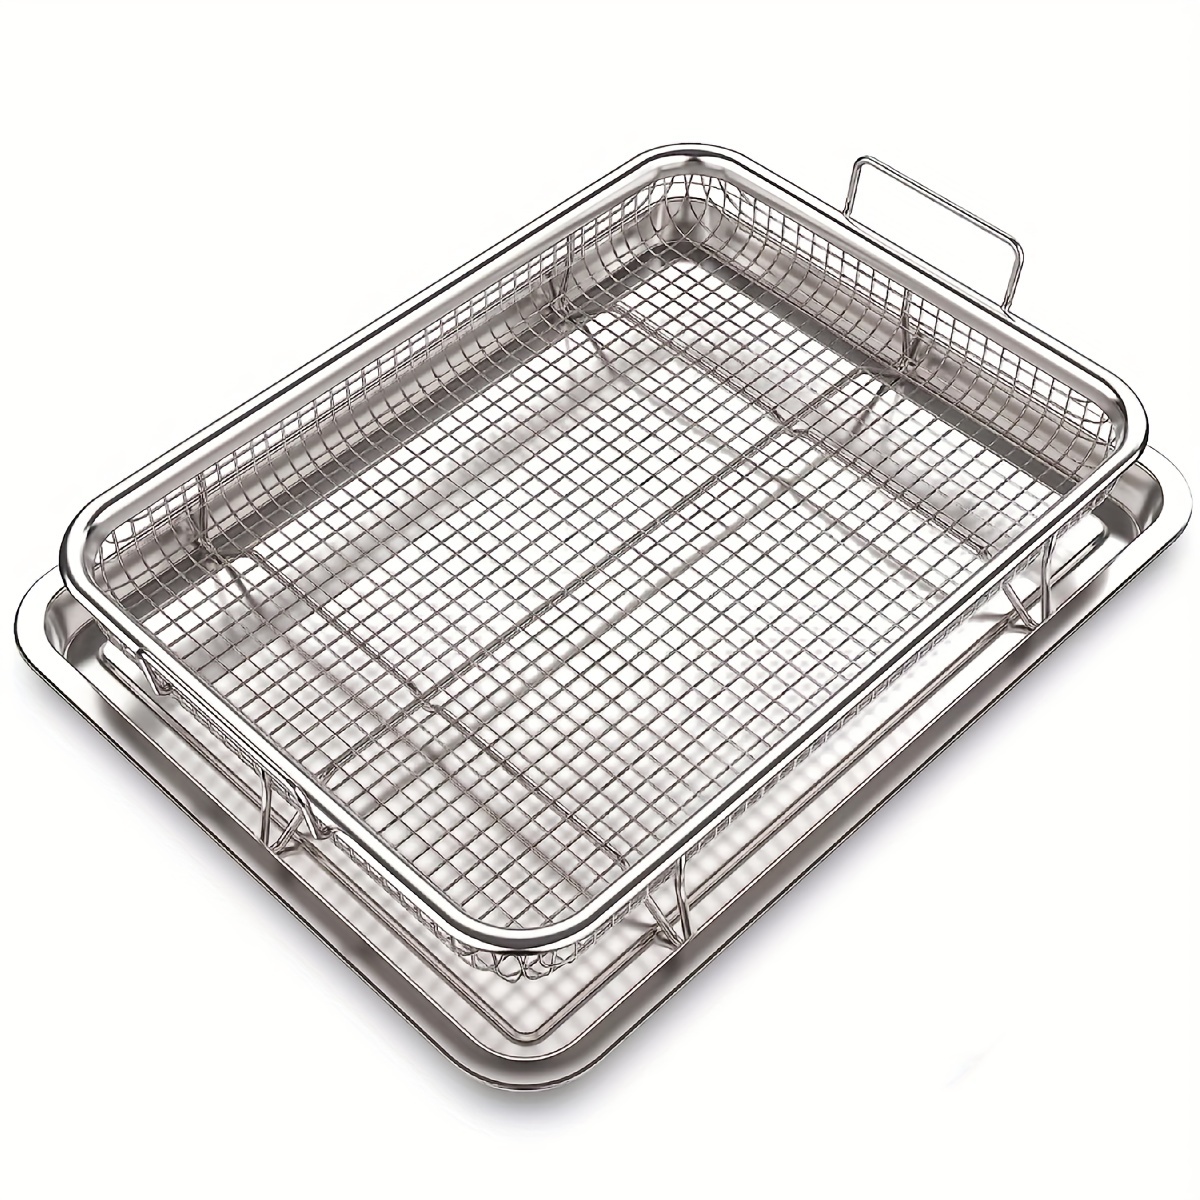 2 Pcs Round Stainless Steel Air Fryer Basket for Oven, Crisper Tray and  Basket 13 Inch, Oven Air Fry Pan Mesh Basket Set - AliExpress